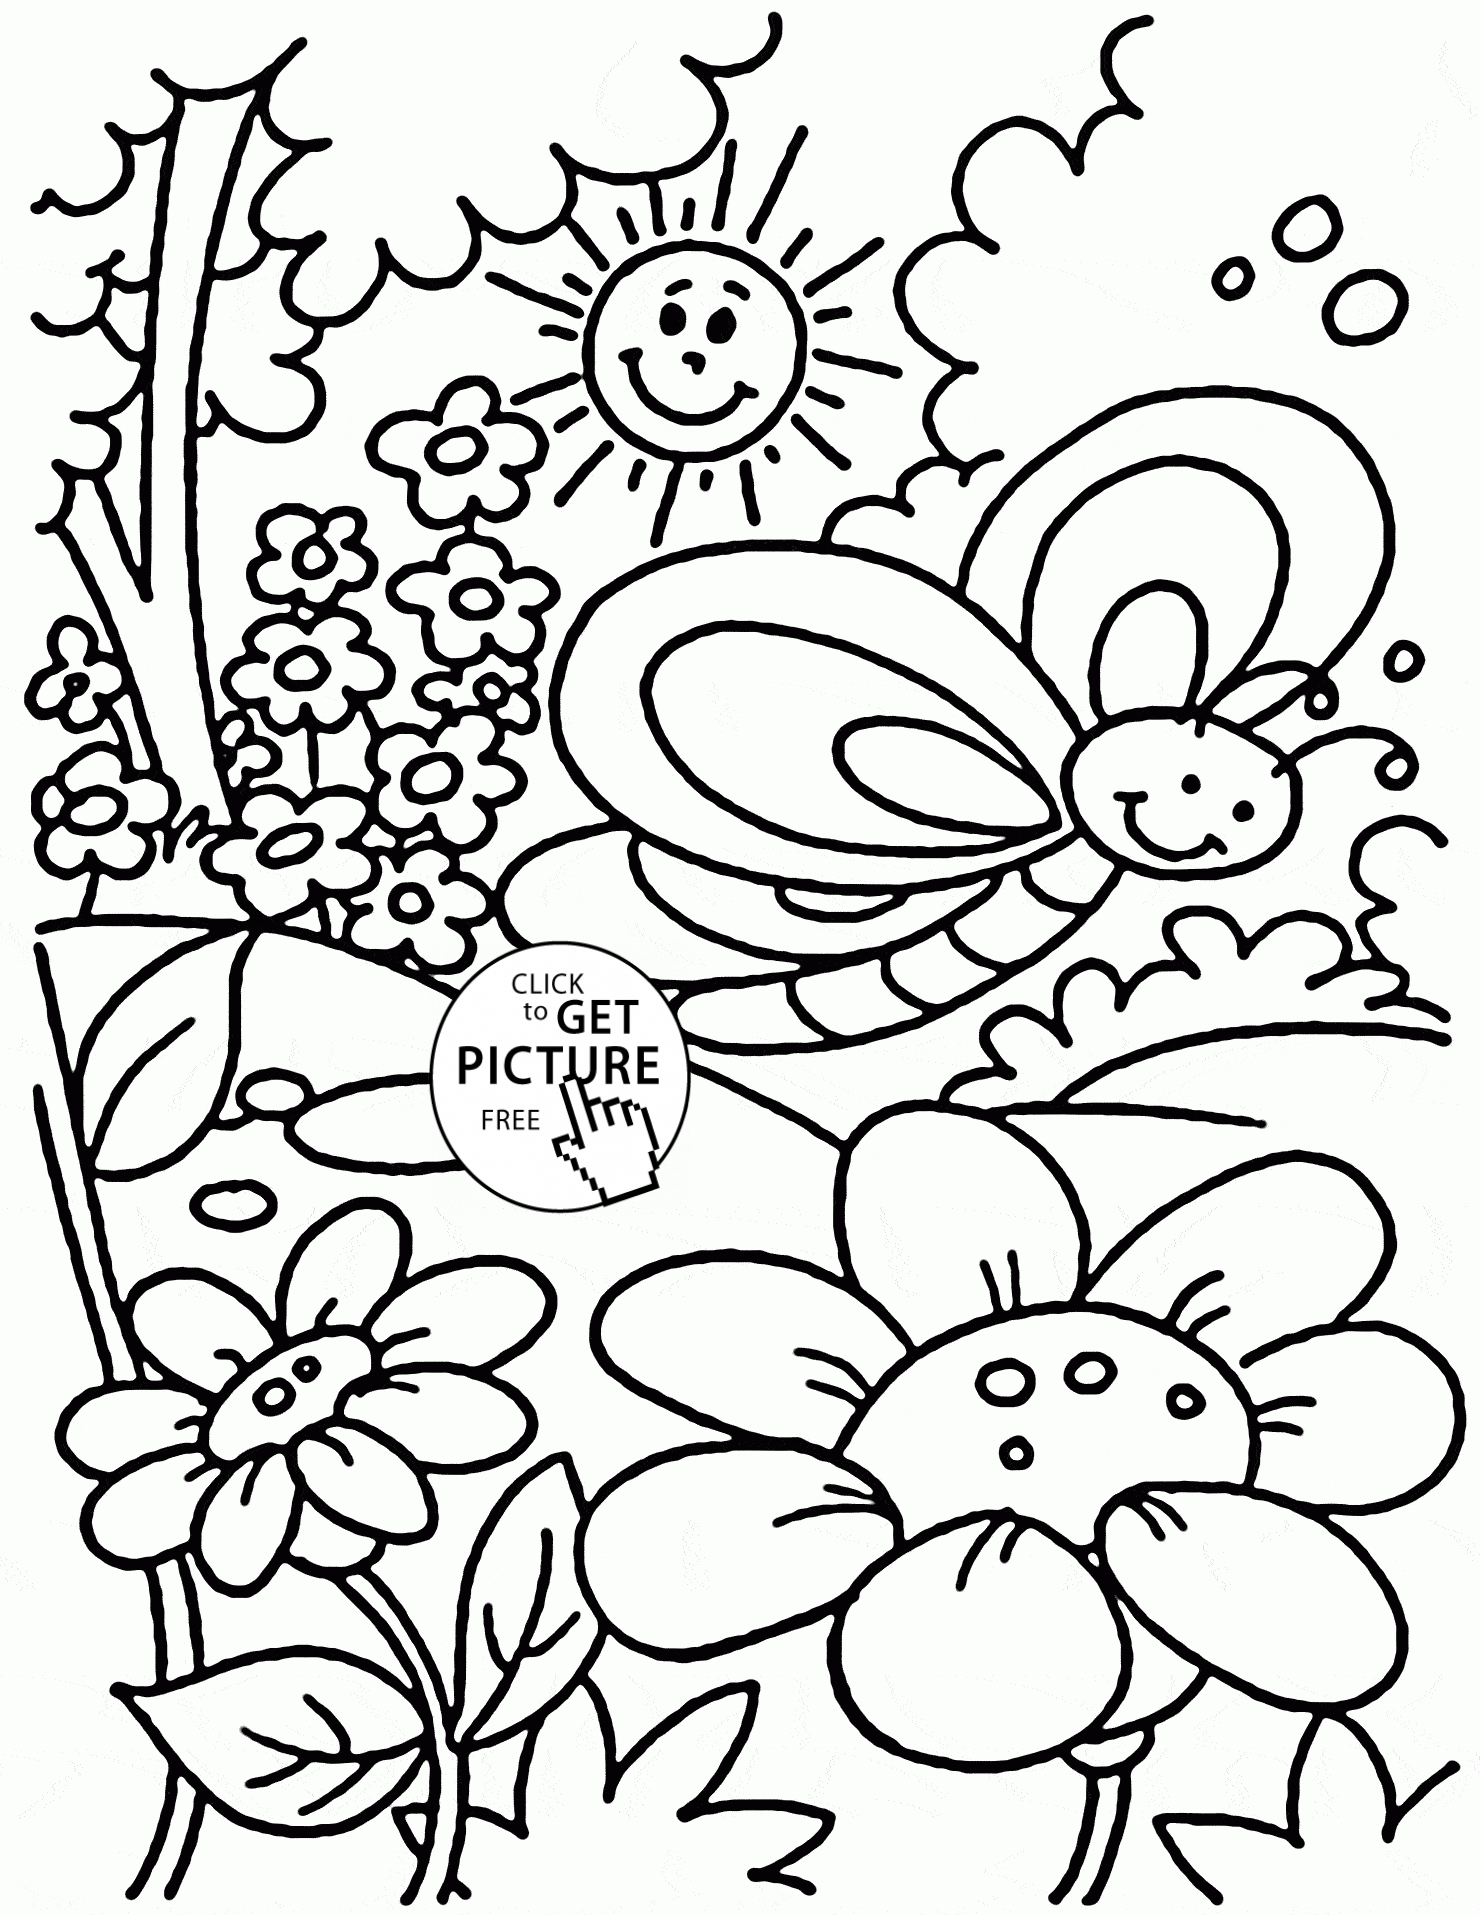 Printable Coloring Pages For Kids – With Worksheets Preschool Also | Free Printable Coloring Worksheets For Kindergarten